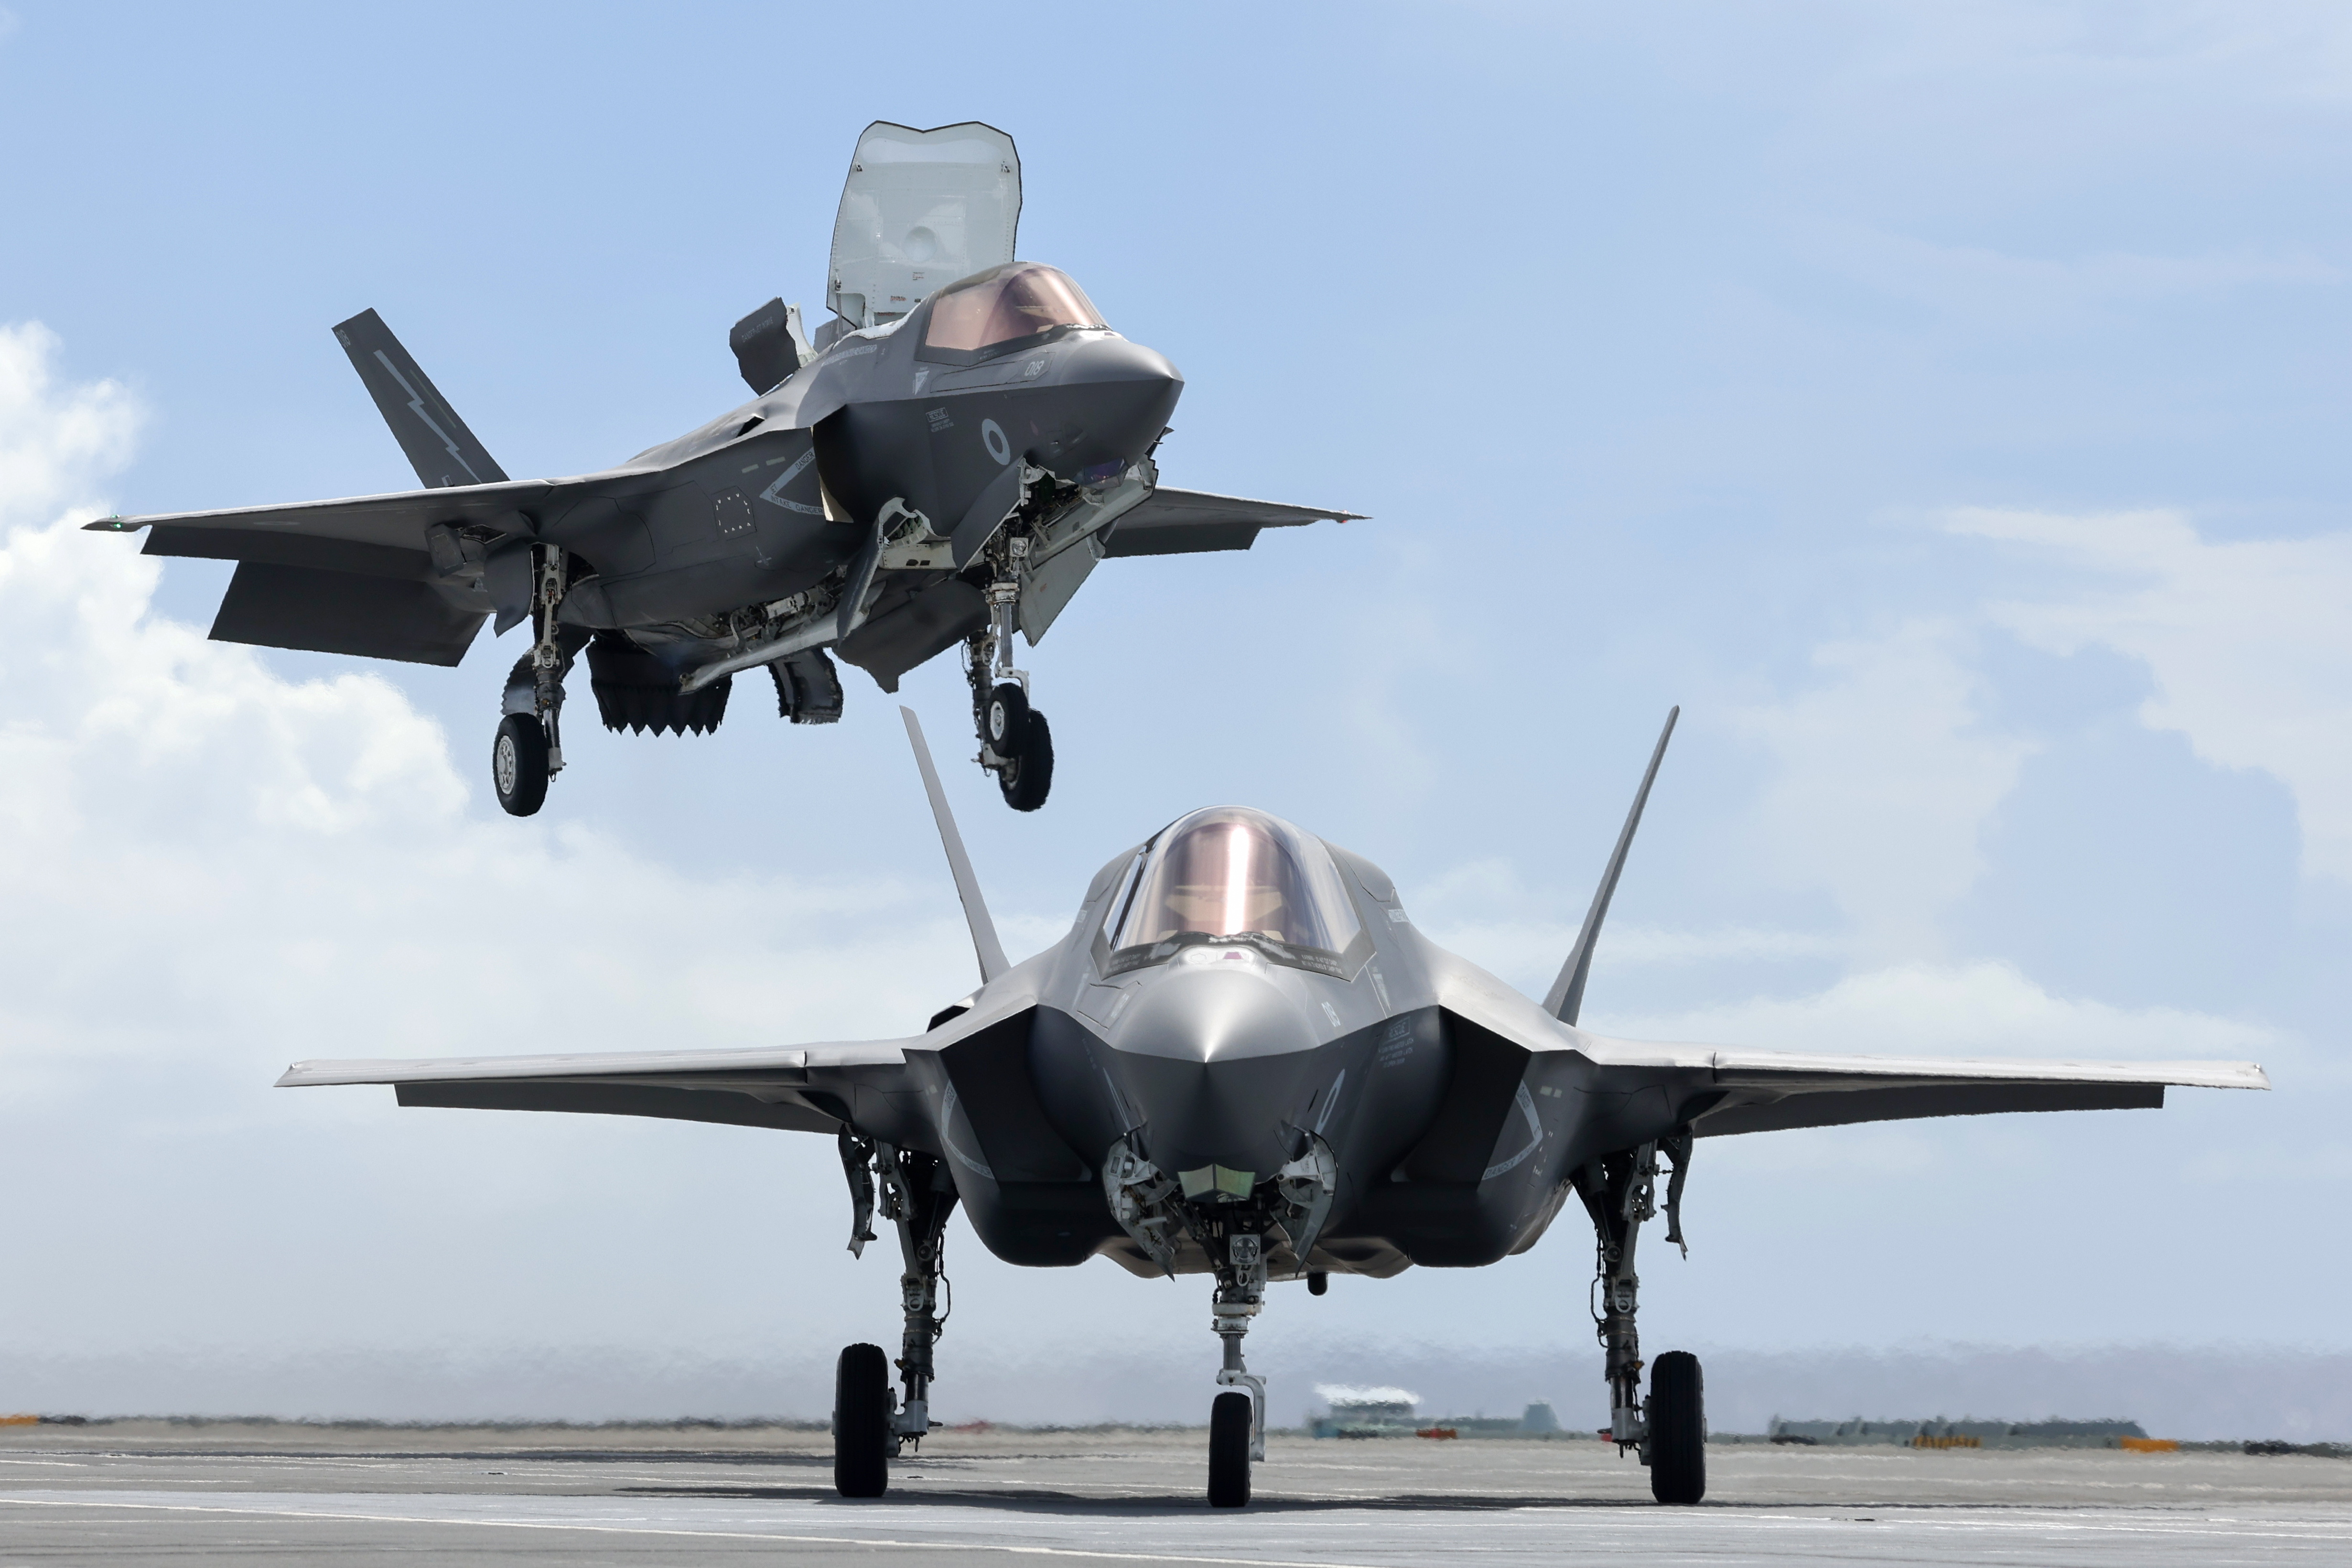 F-35B Lightning taking off, over another on the runway.